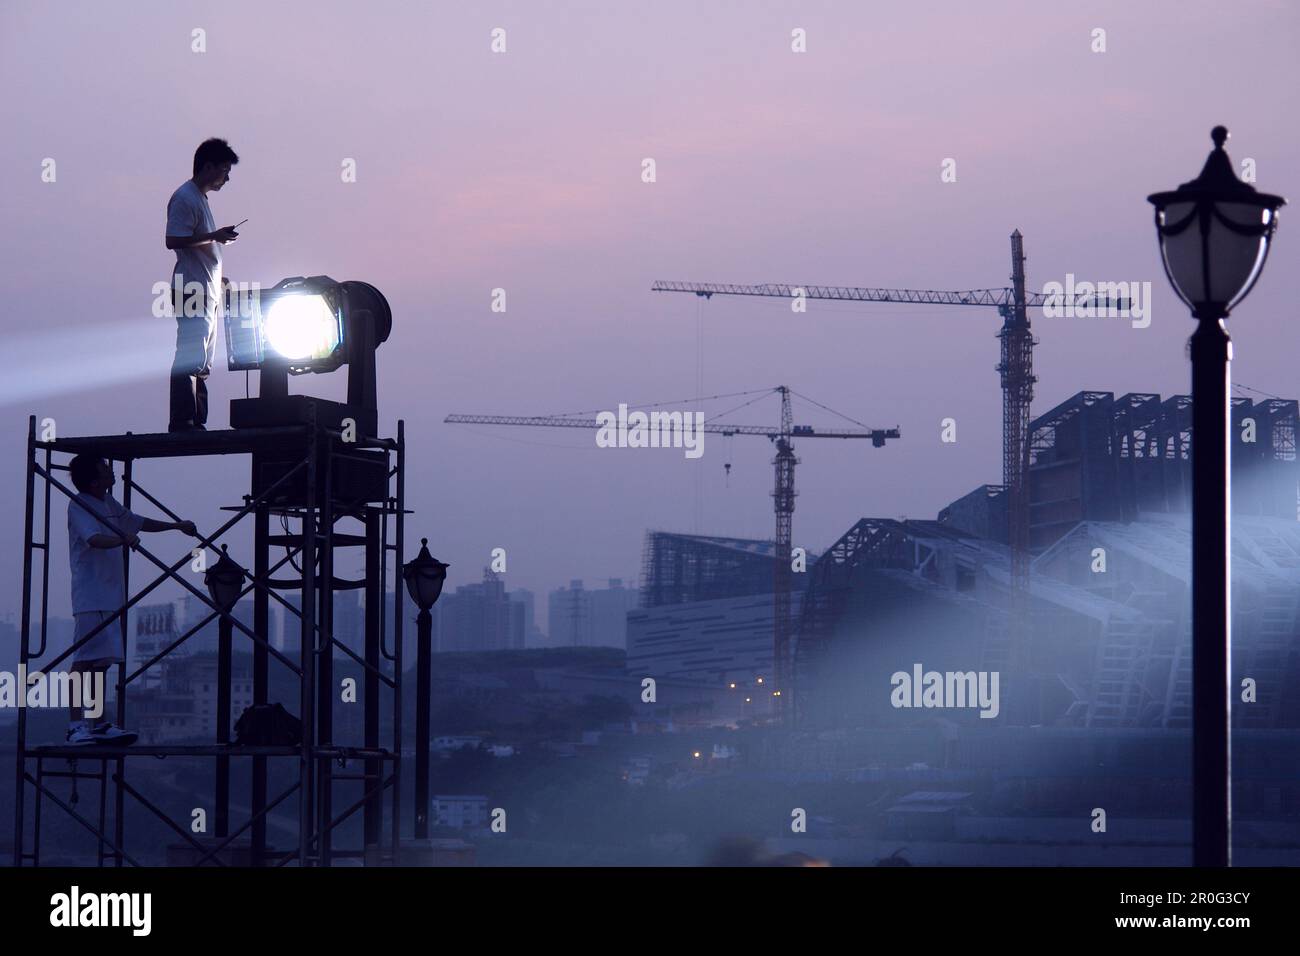 Two illuminators in the attitude of a floodlight on a scaffolding, Chongqing, China, Asia Stock Photo